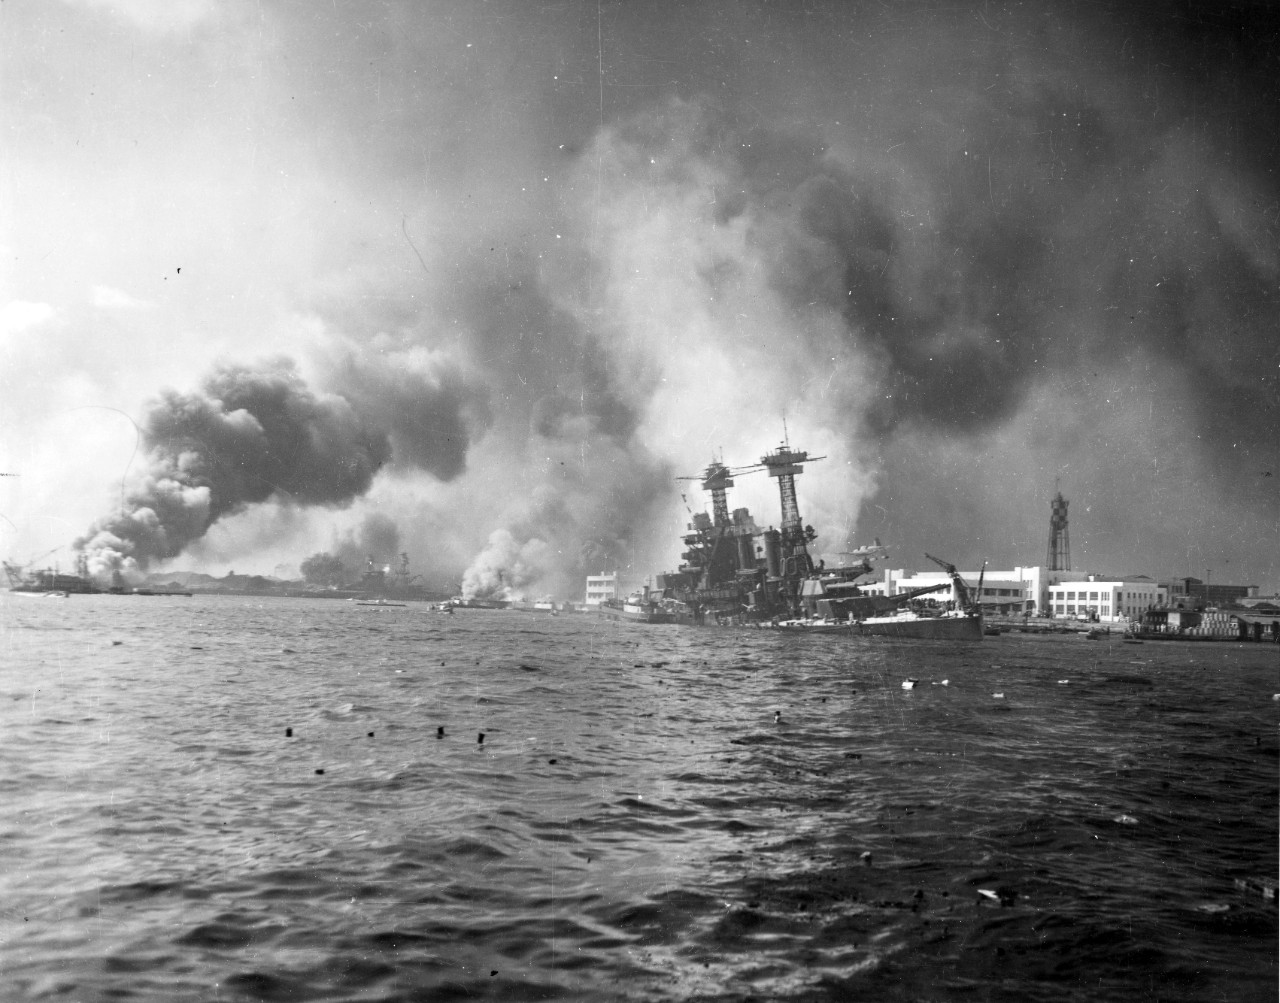 A view down Pearl Harbor’s main channel during the Japanese air attack, 7 Dec 1941. Note the battleship USS California listing and sinking and note the Ford Island water tower at right.